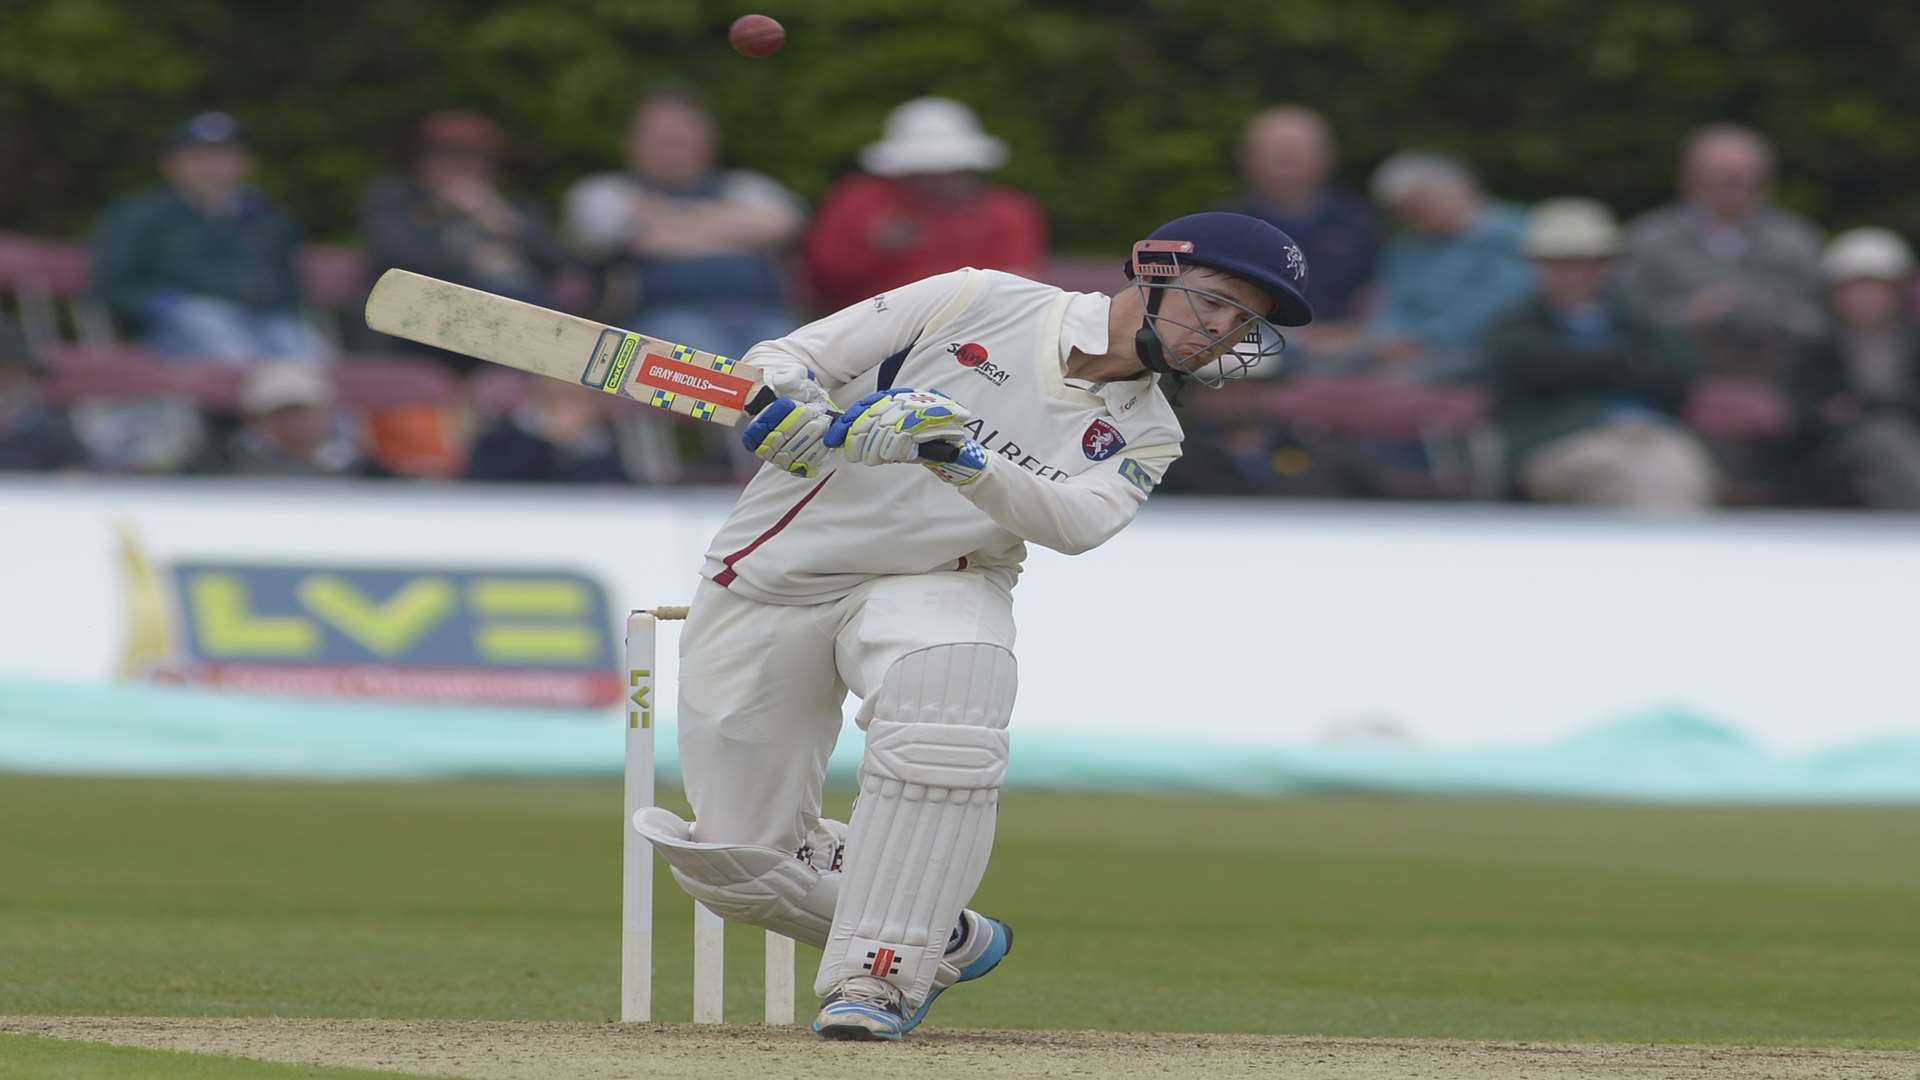 Kent batsman Fabian Cowdrey avoids a bouncer during his 39 in the first innings against Surrey at Beckenham Picture: Barry Goodwin